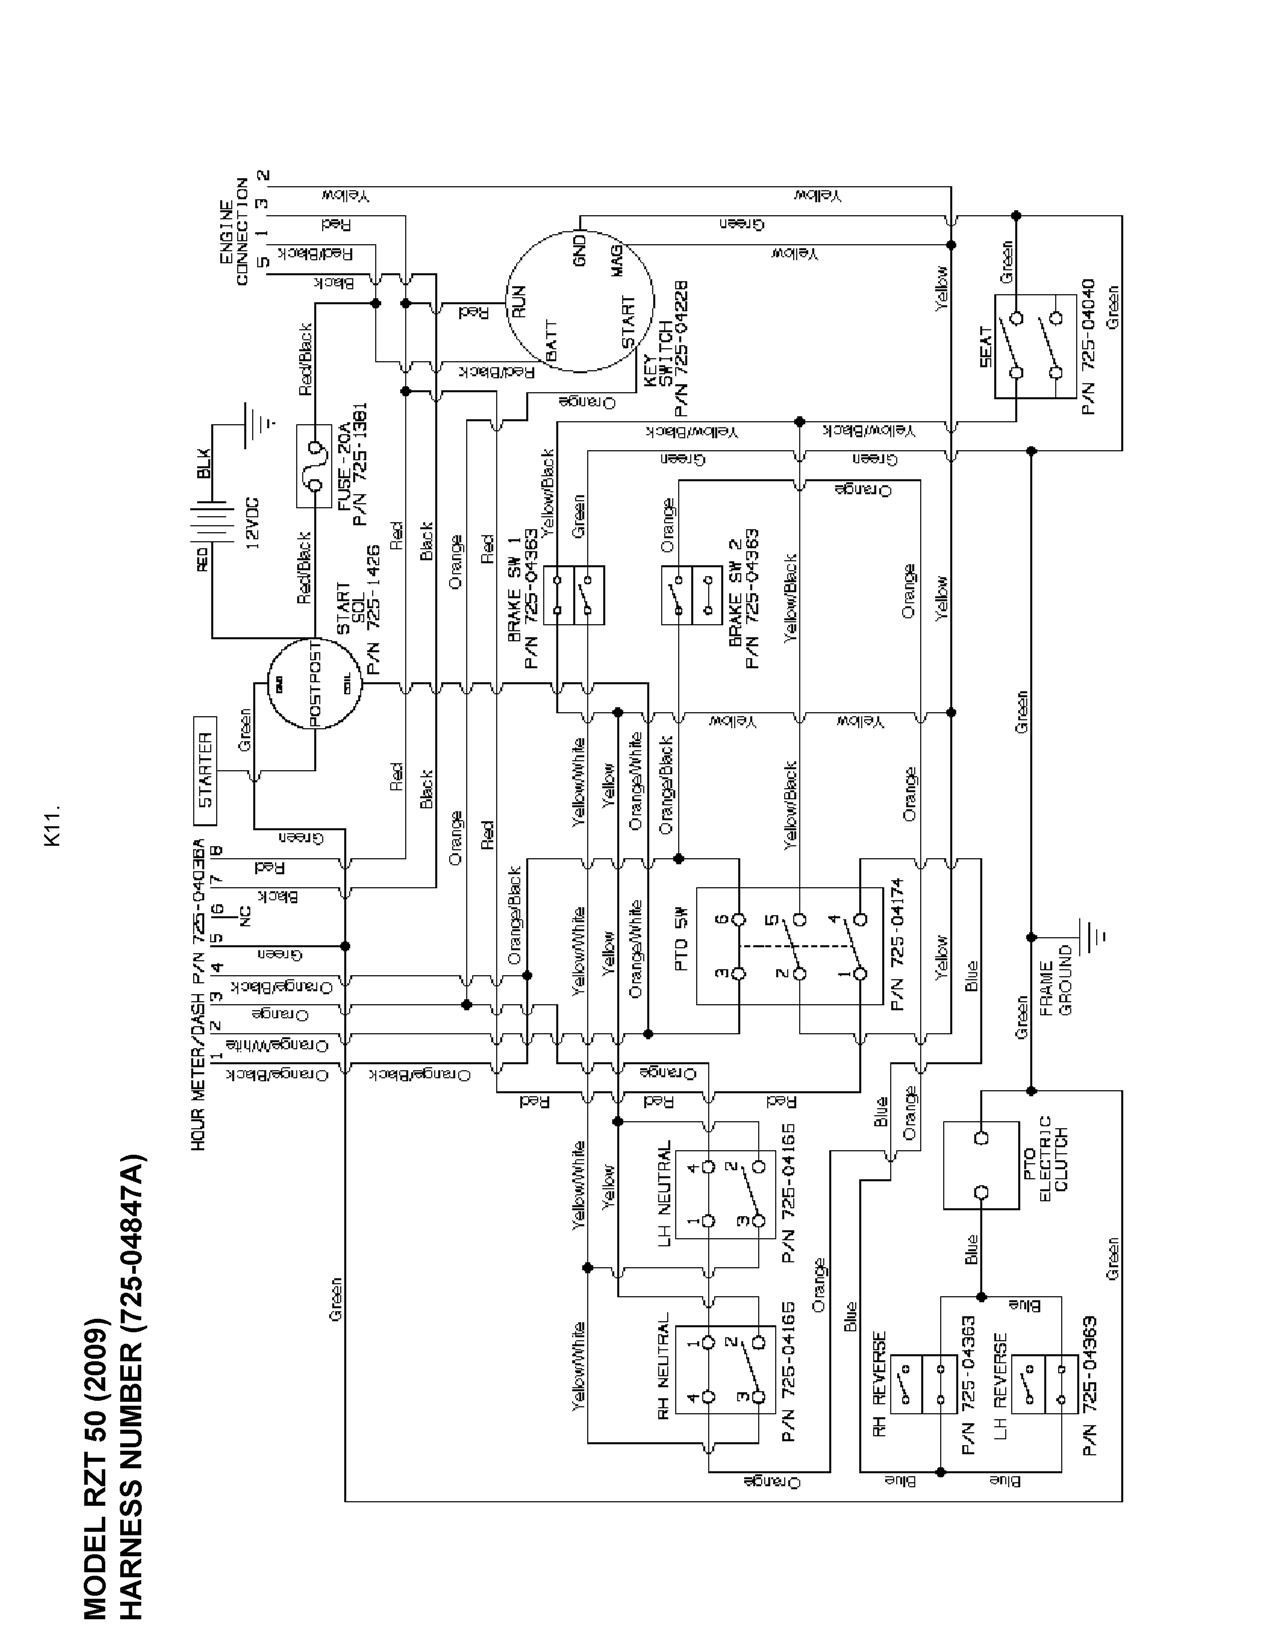 Cub cadet wiring diagram 2135 cub cadet troubleshooting help choice image free troubleshooting leeyfo Image collections